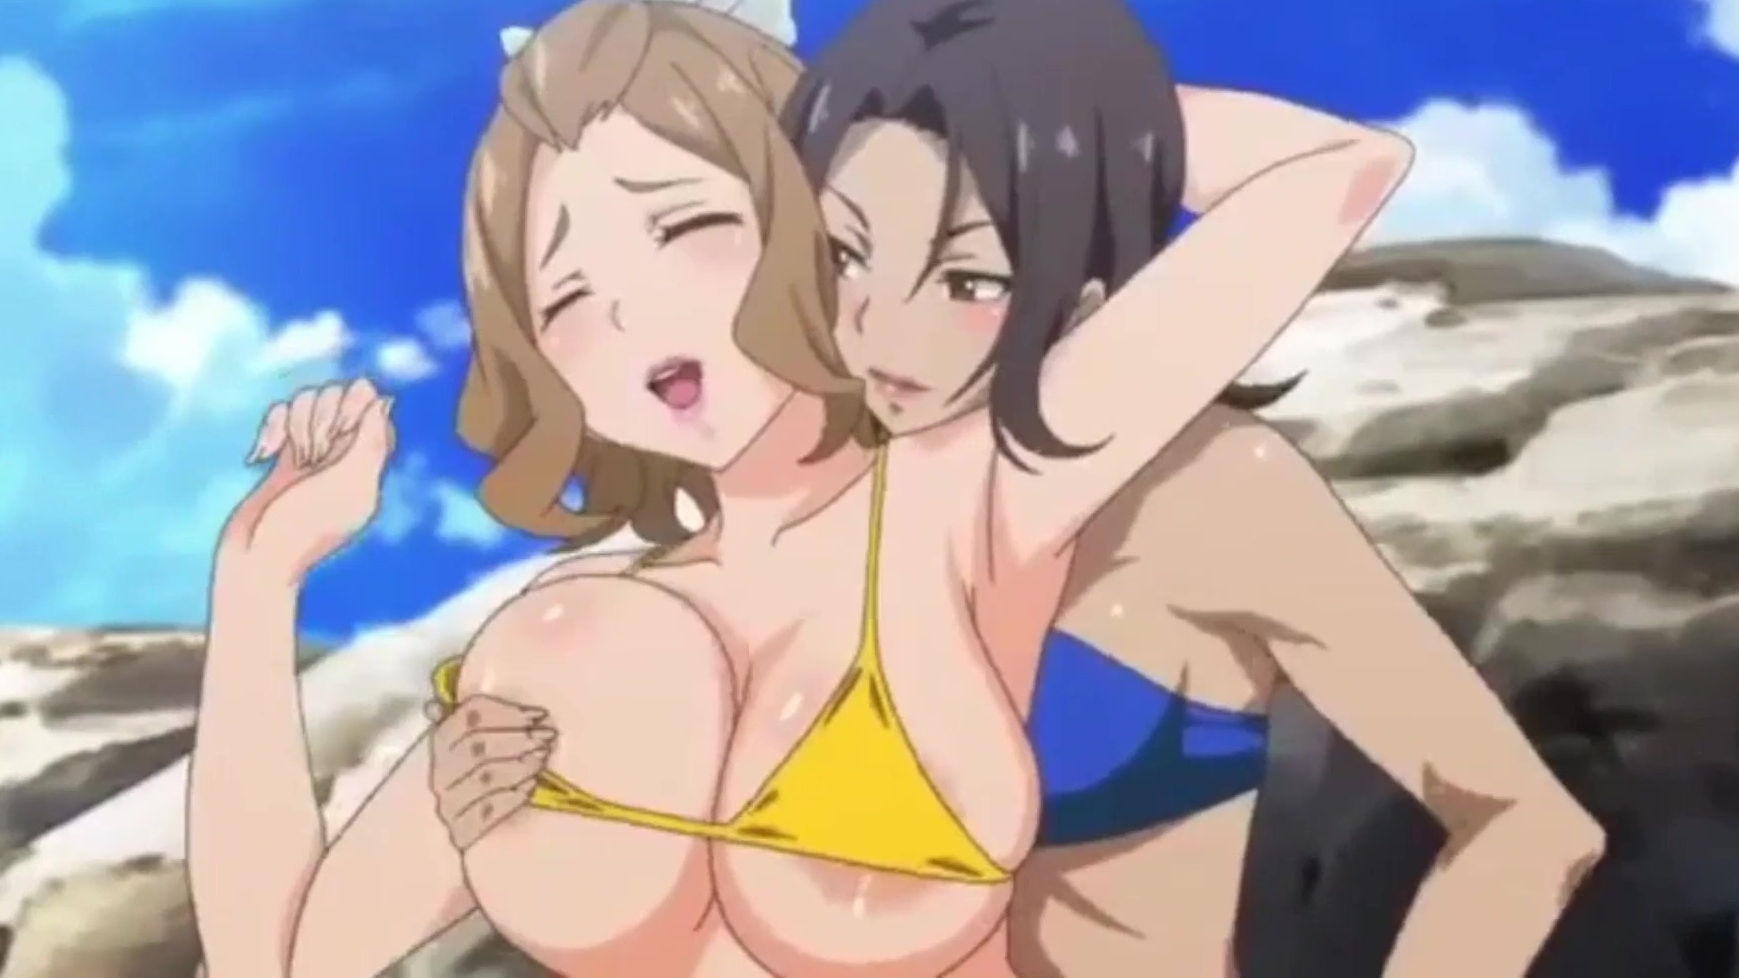 Hot Black Lesbian Hentai - Hentai Compilation of Busty, Tits-crazy, Lesbian Valkyries